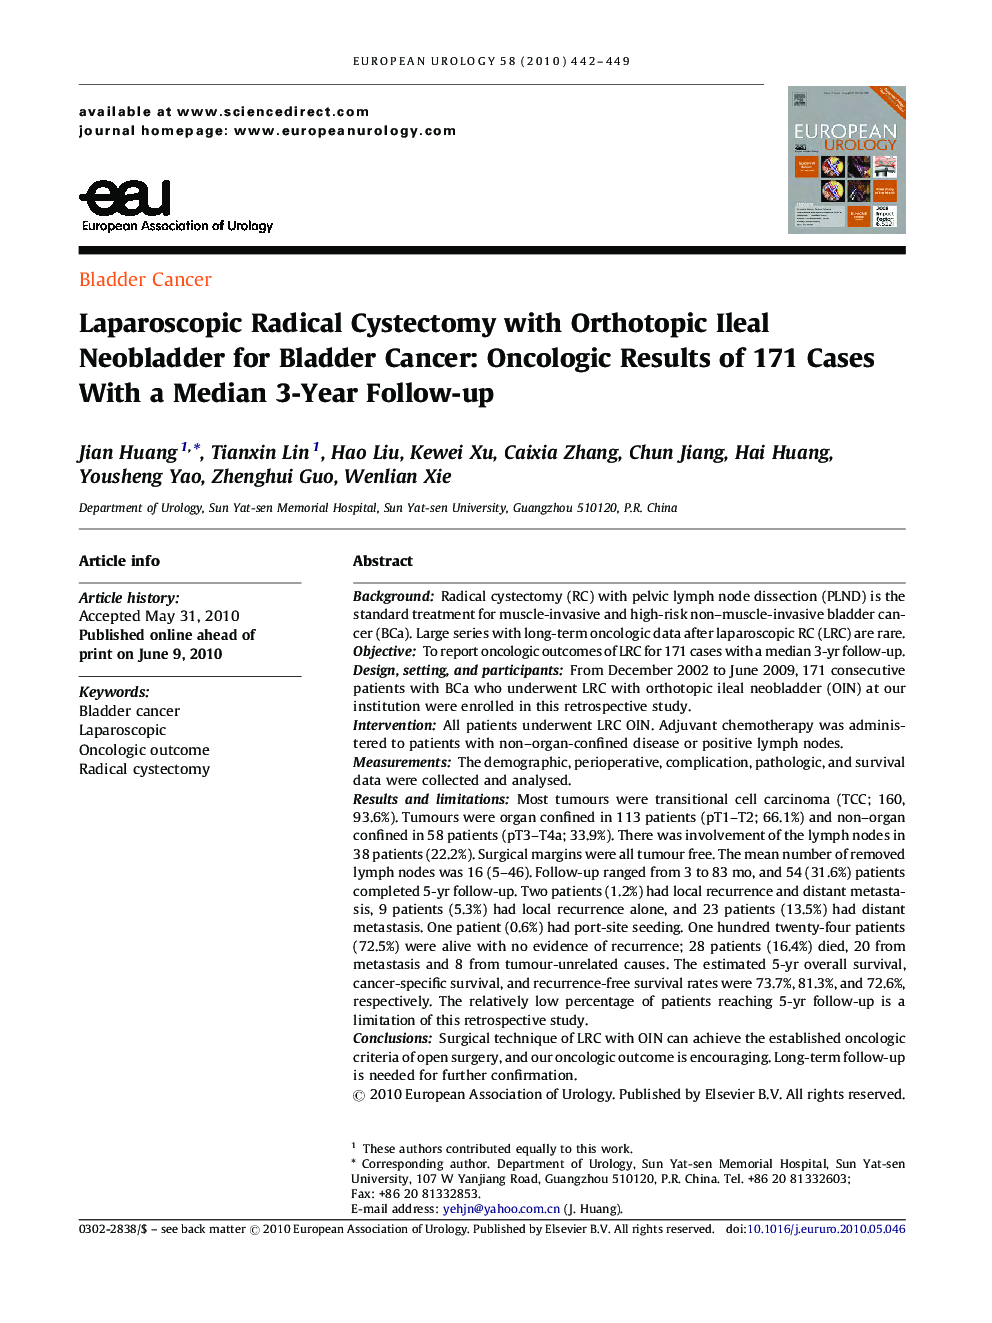 Laparoscopic Radical Cystectomy with Orthotopic Ileal Neobladder for Bladder Cancer: Oncologic Results of 171 Cases With a Median 3-Year Follow-up